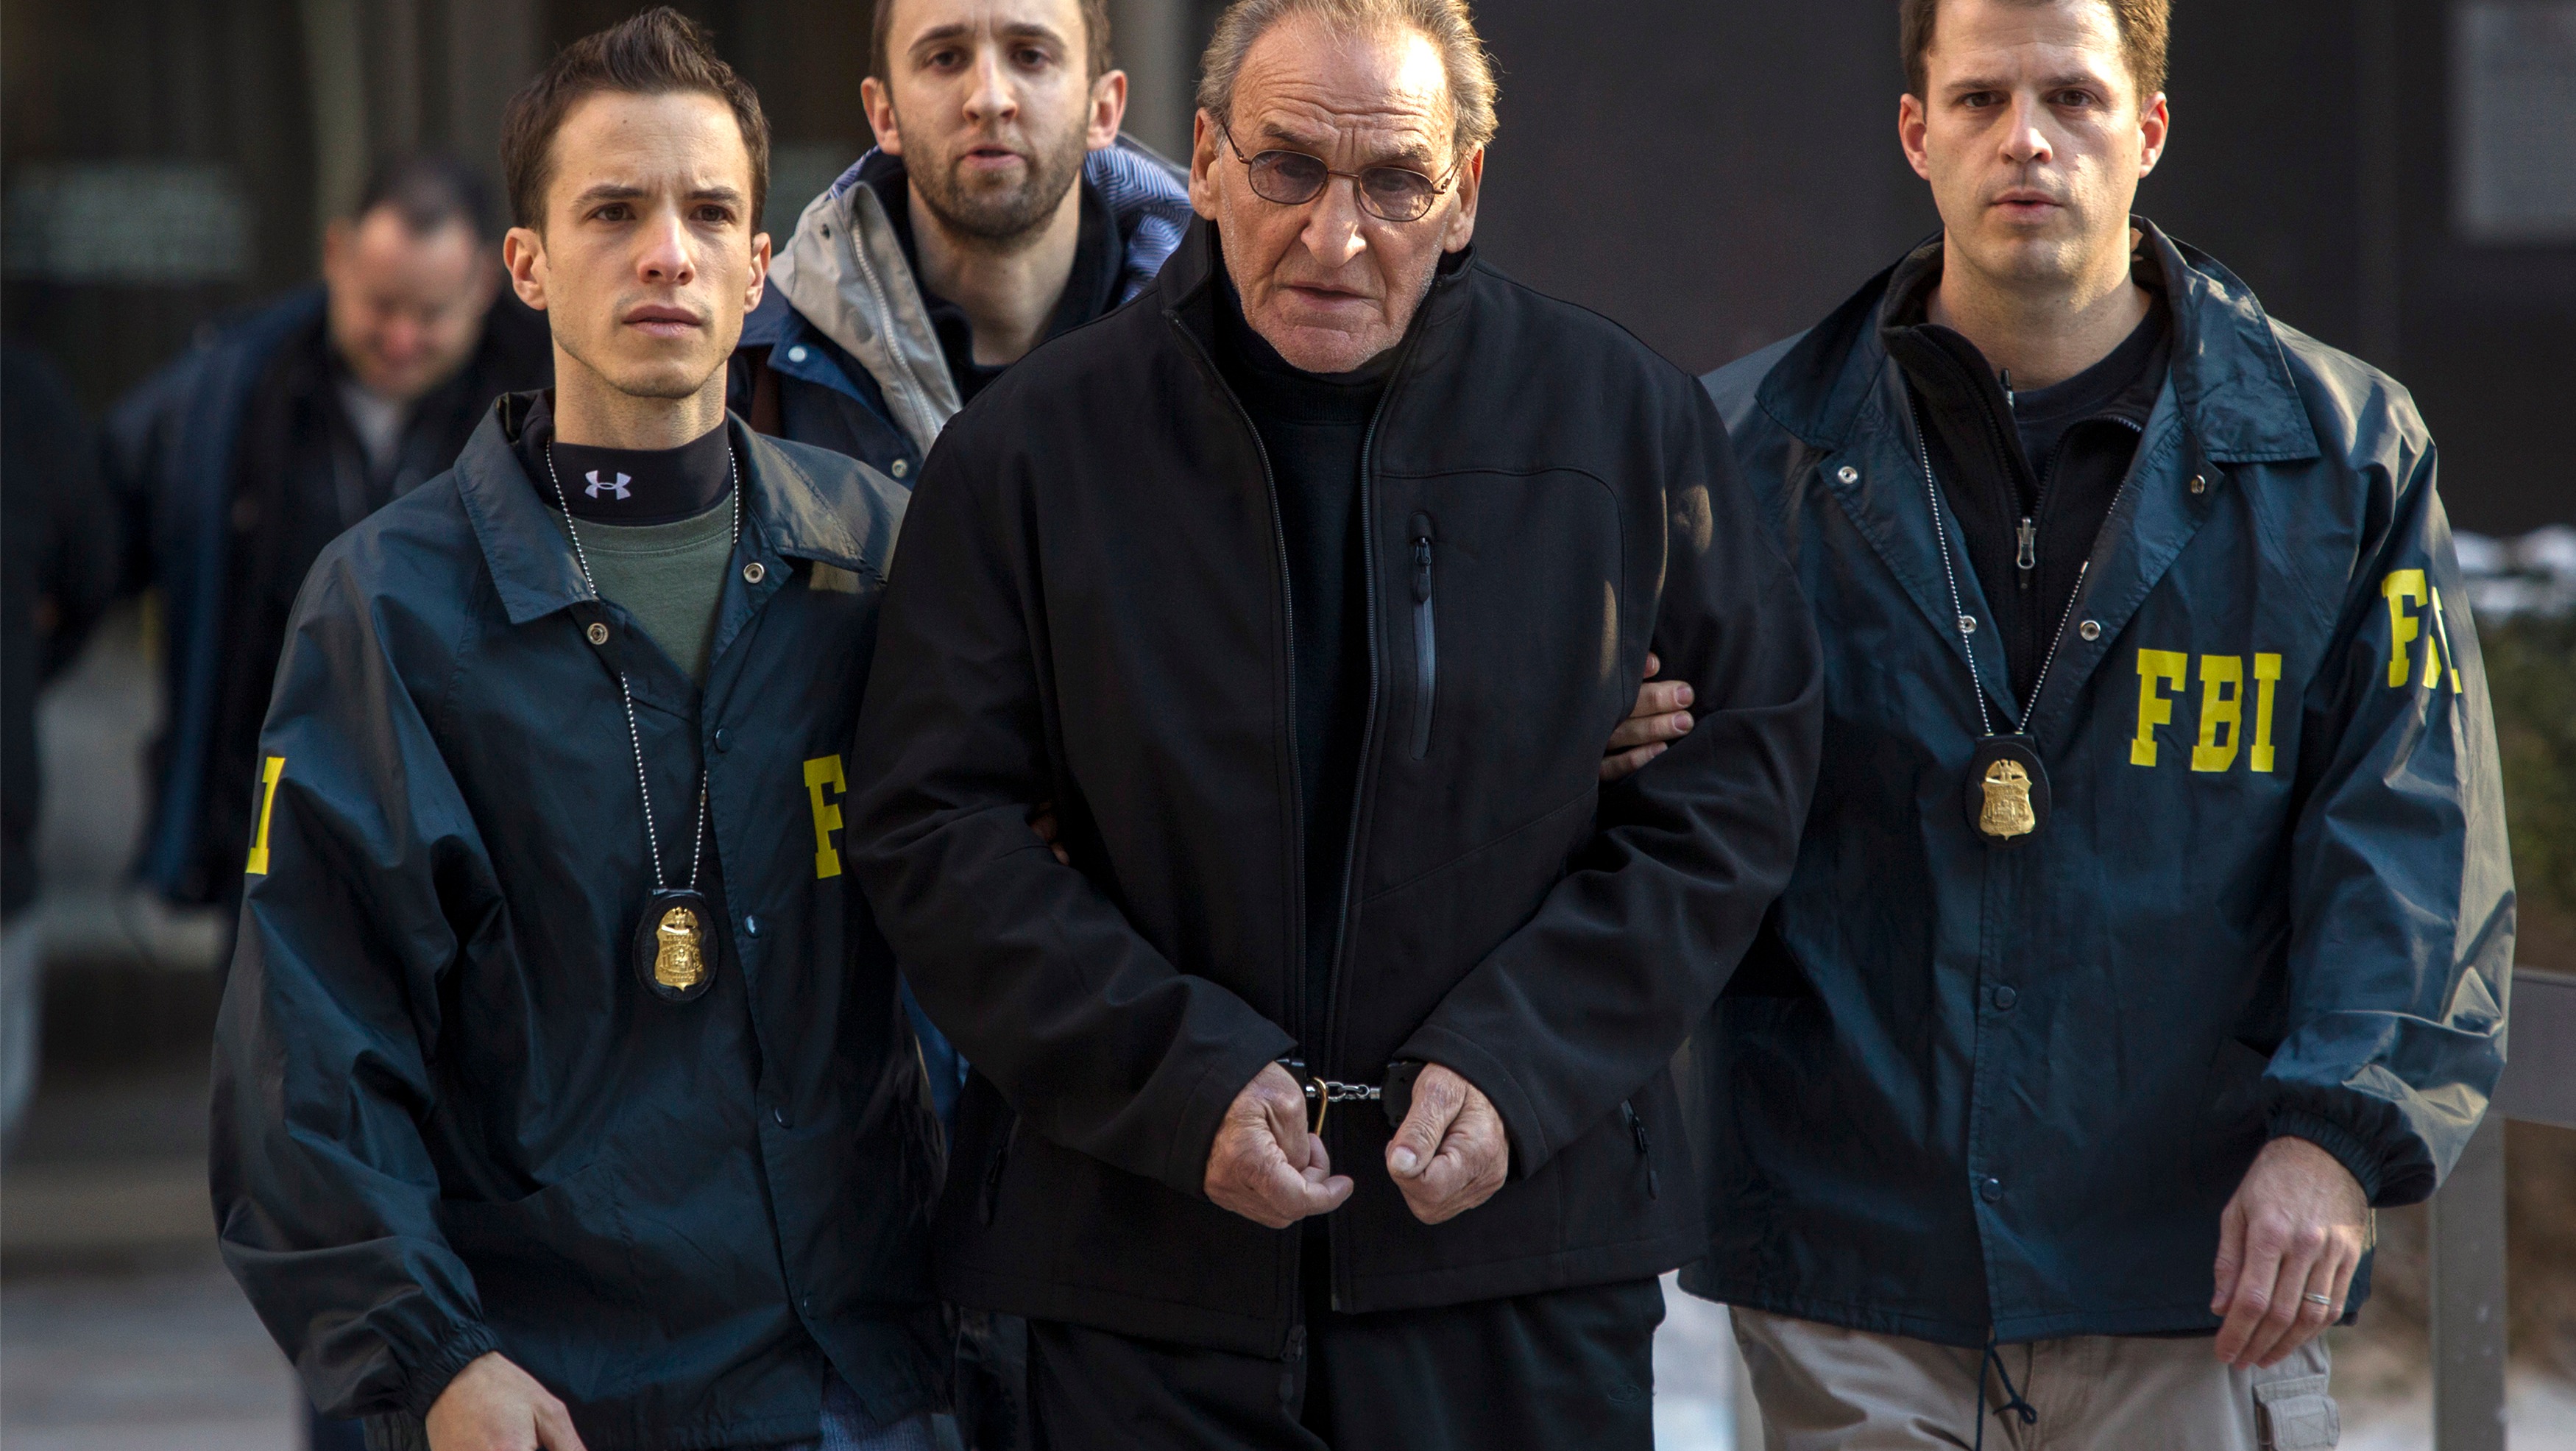 Accused mobster goes on trial for 'Goodfellas' heist | ITV News